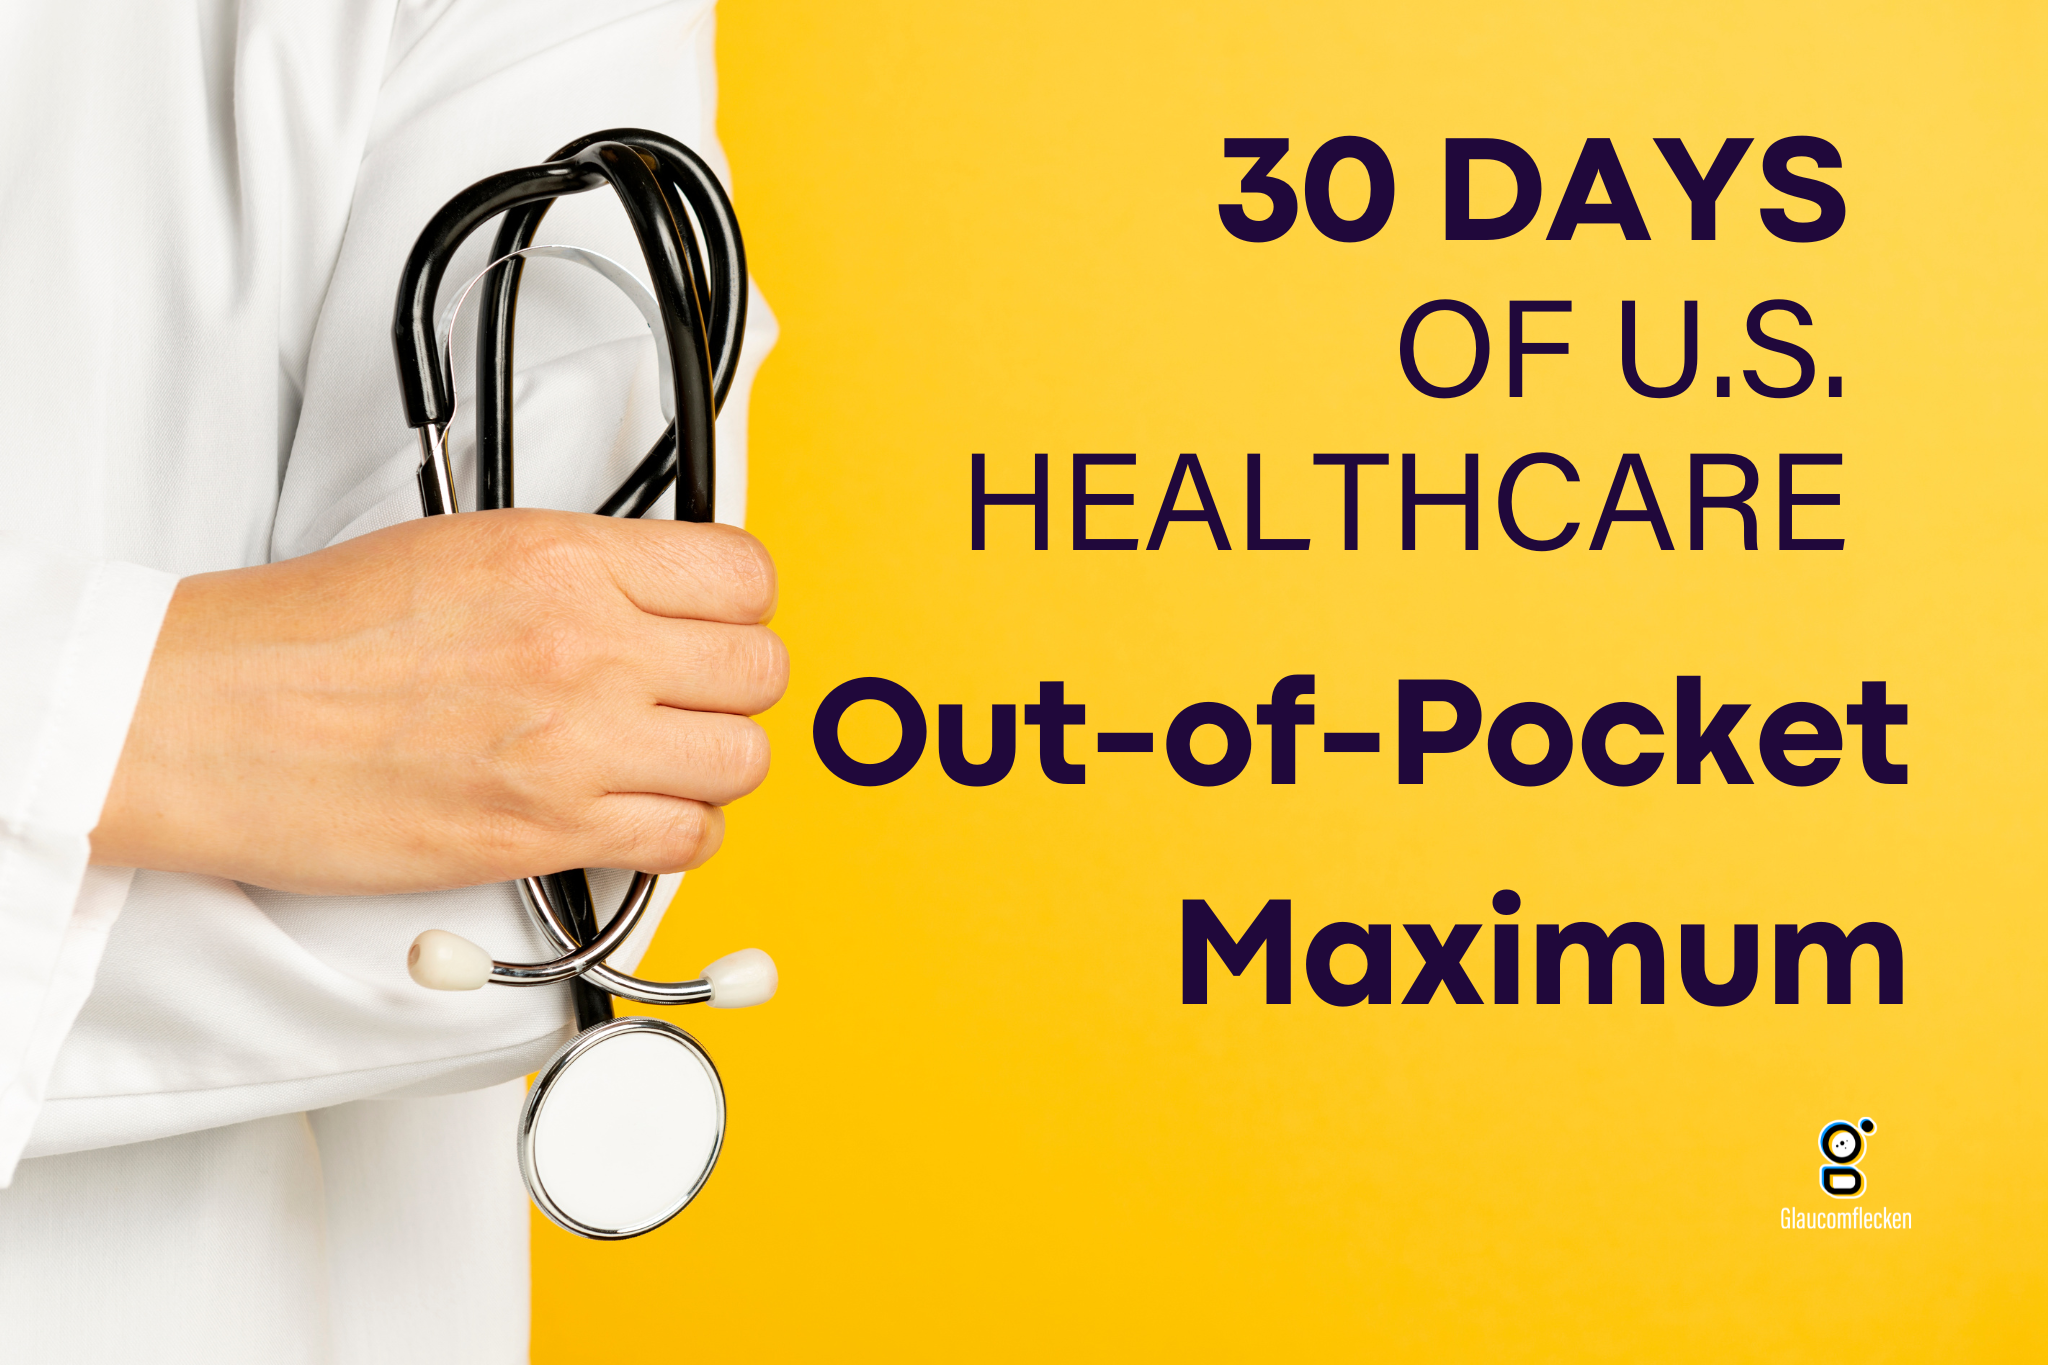 Hidden Healthcare Costs After Your Out-of-Pocket Maximum